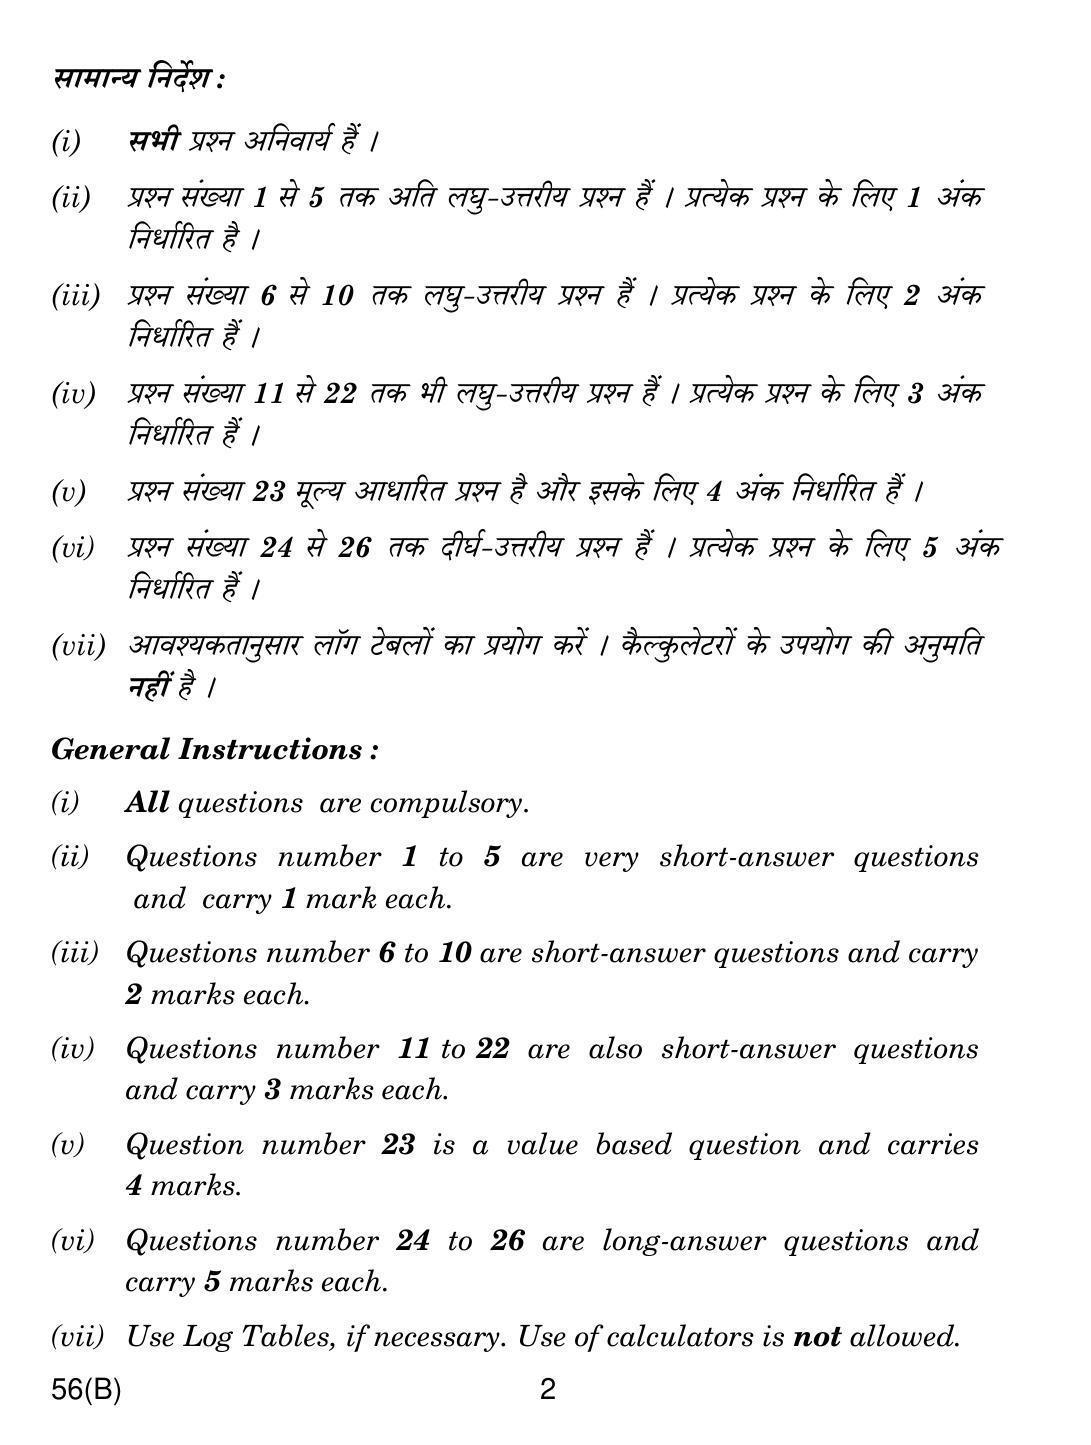 CBSE Class 12 56(B) CHEMISTRY FOR BLIND CANDIDATES 2018 Question Paper - Page 2